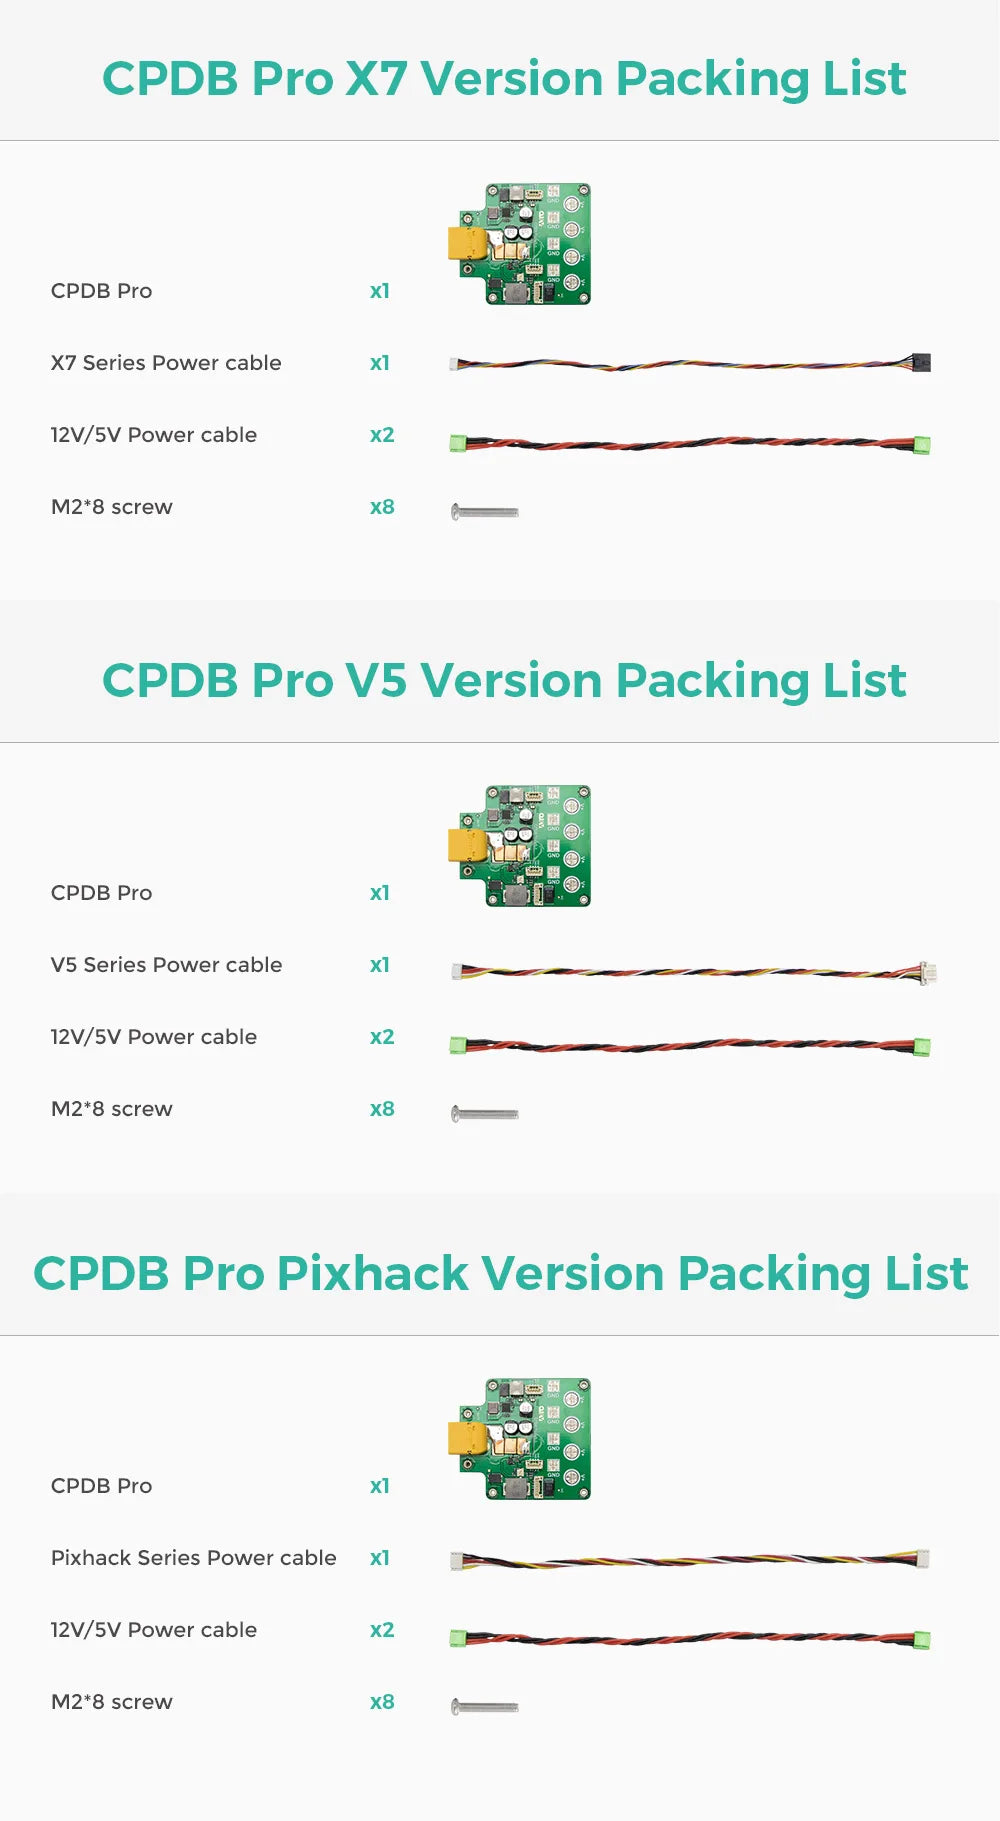 Packing List CPDB Pro X7 Series Power cable 12V/SV Power cable